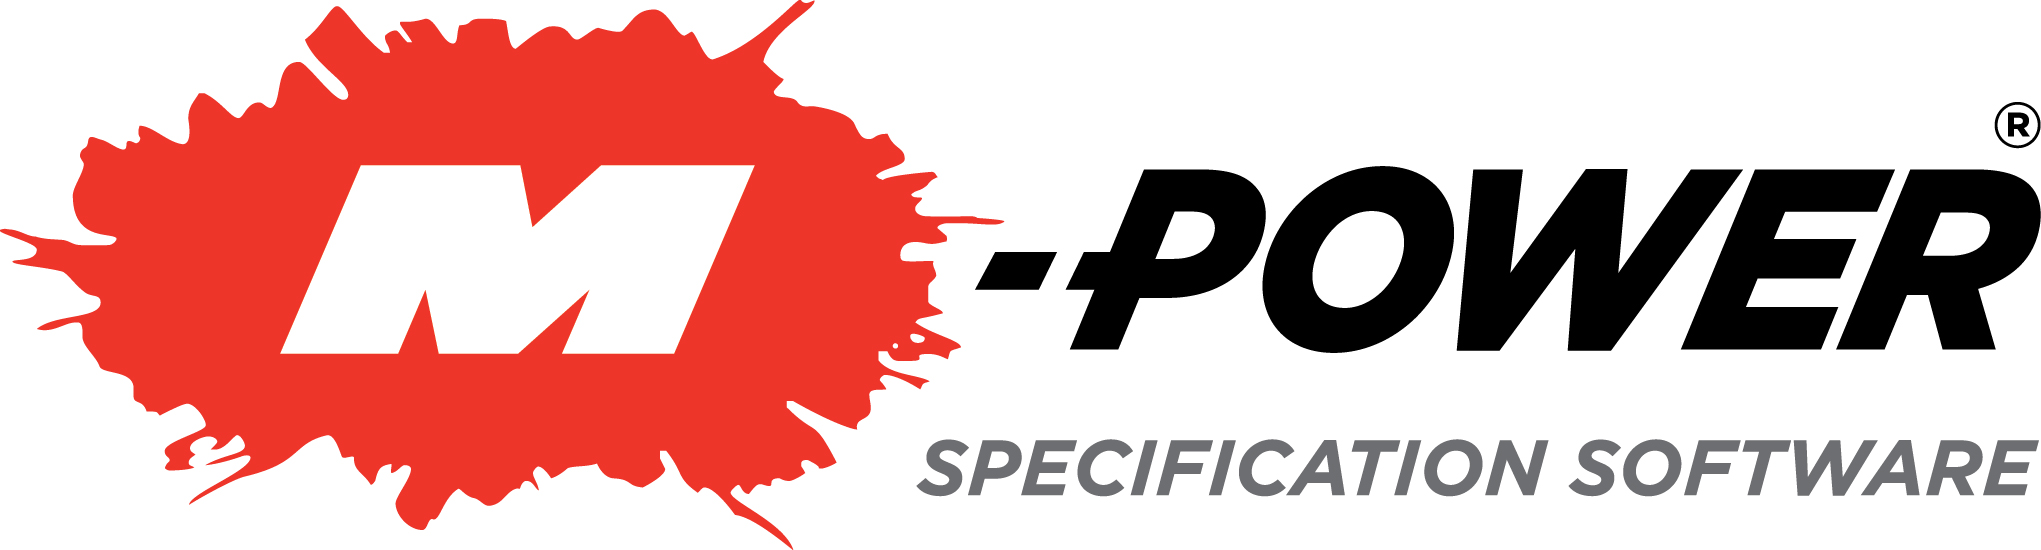 The logo for M-Power Specification Software. It shows the Muncie Power Powerburst logo with a large white M in the center and a hyphen and POWER to the right of it. Specification Software is listed under the word POWER.